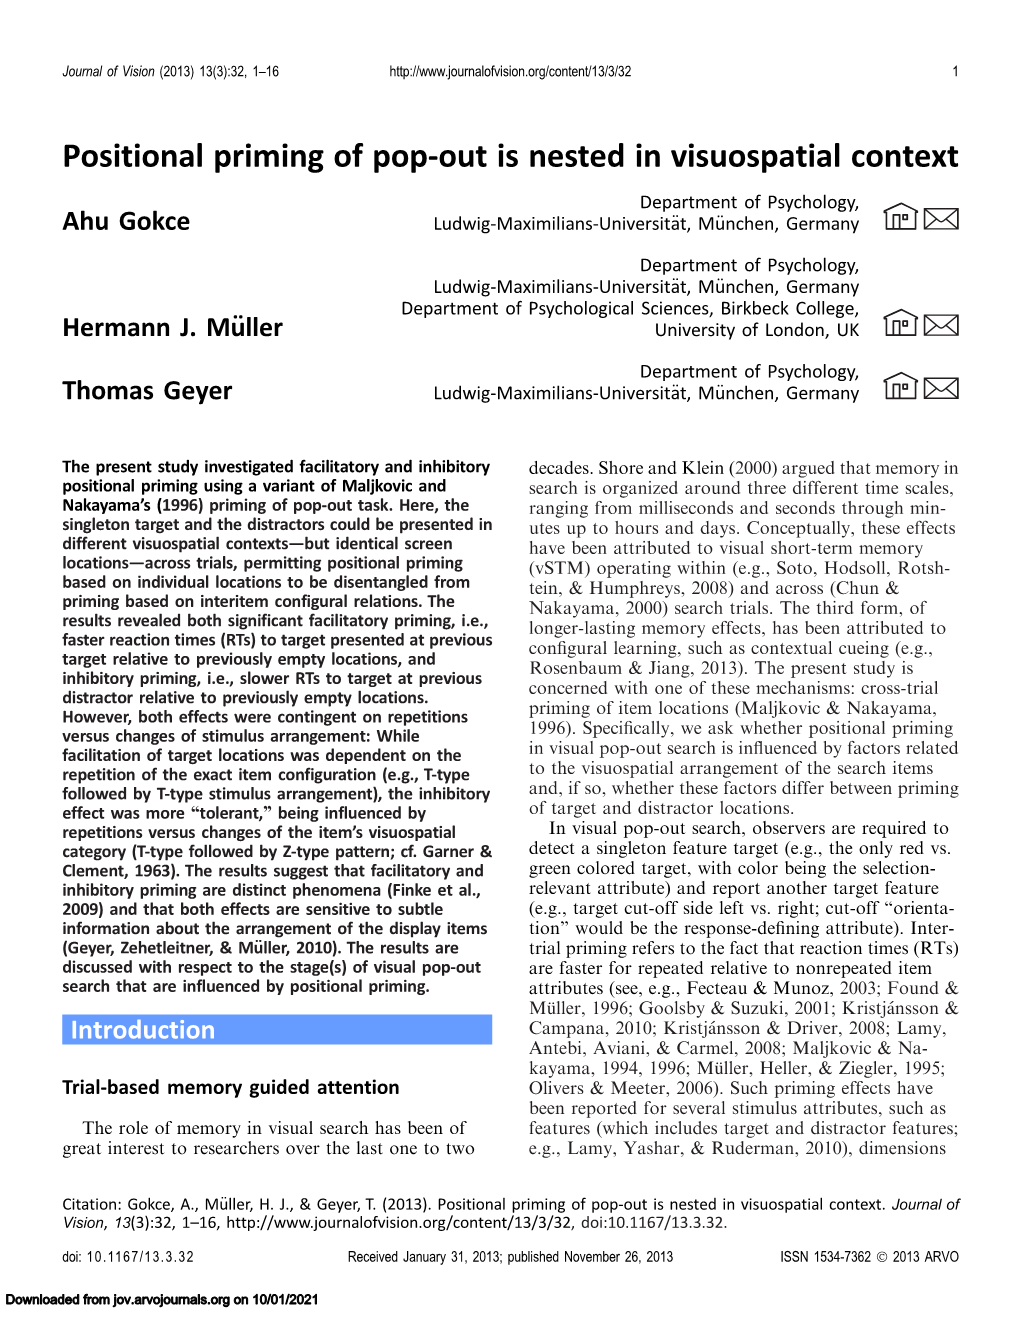 Positional Priming of Pop-Out Is Nested in Visuospatial Context Department of Psychology, # Ahu Gokce Ludwig-Maximilians-Universitat,¨ Munchen,¨ Germany $